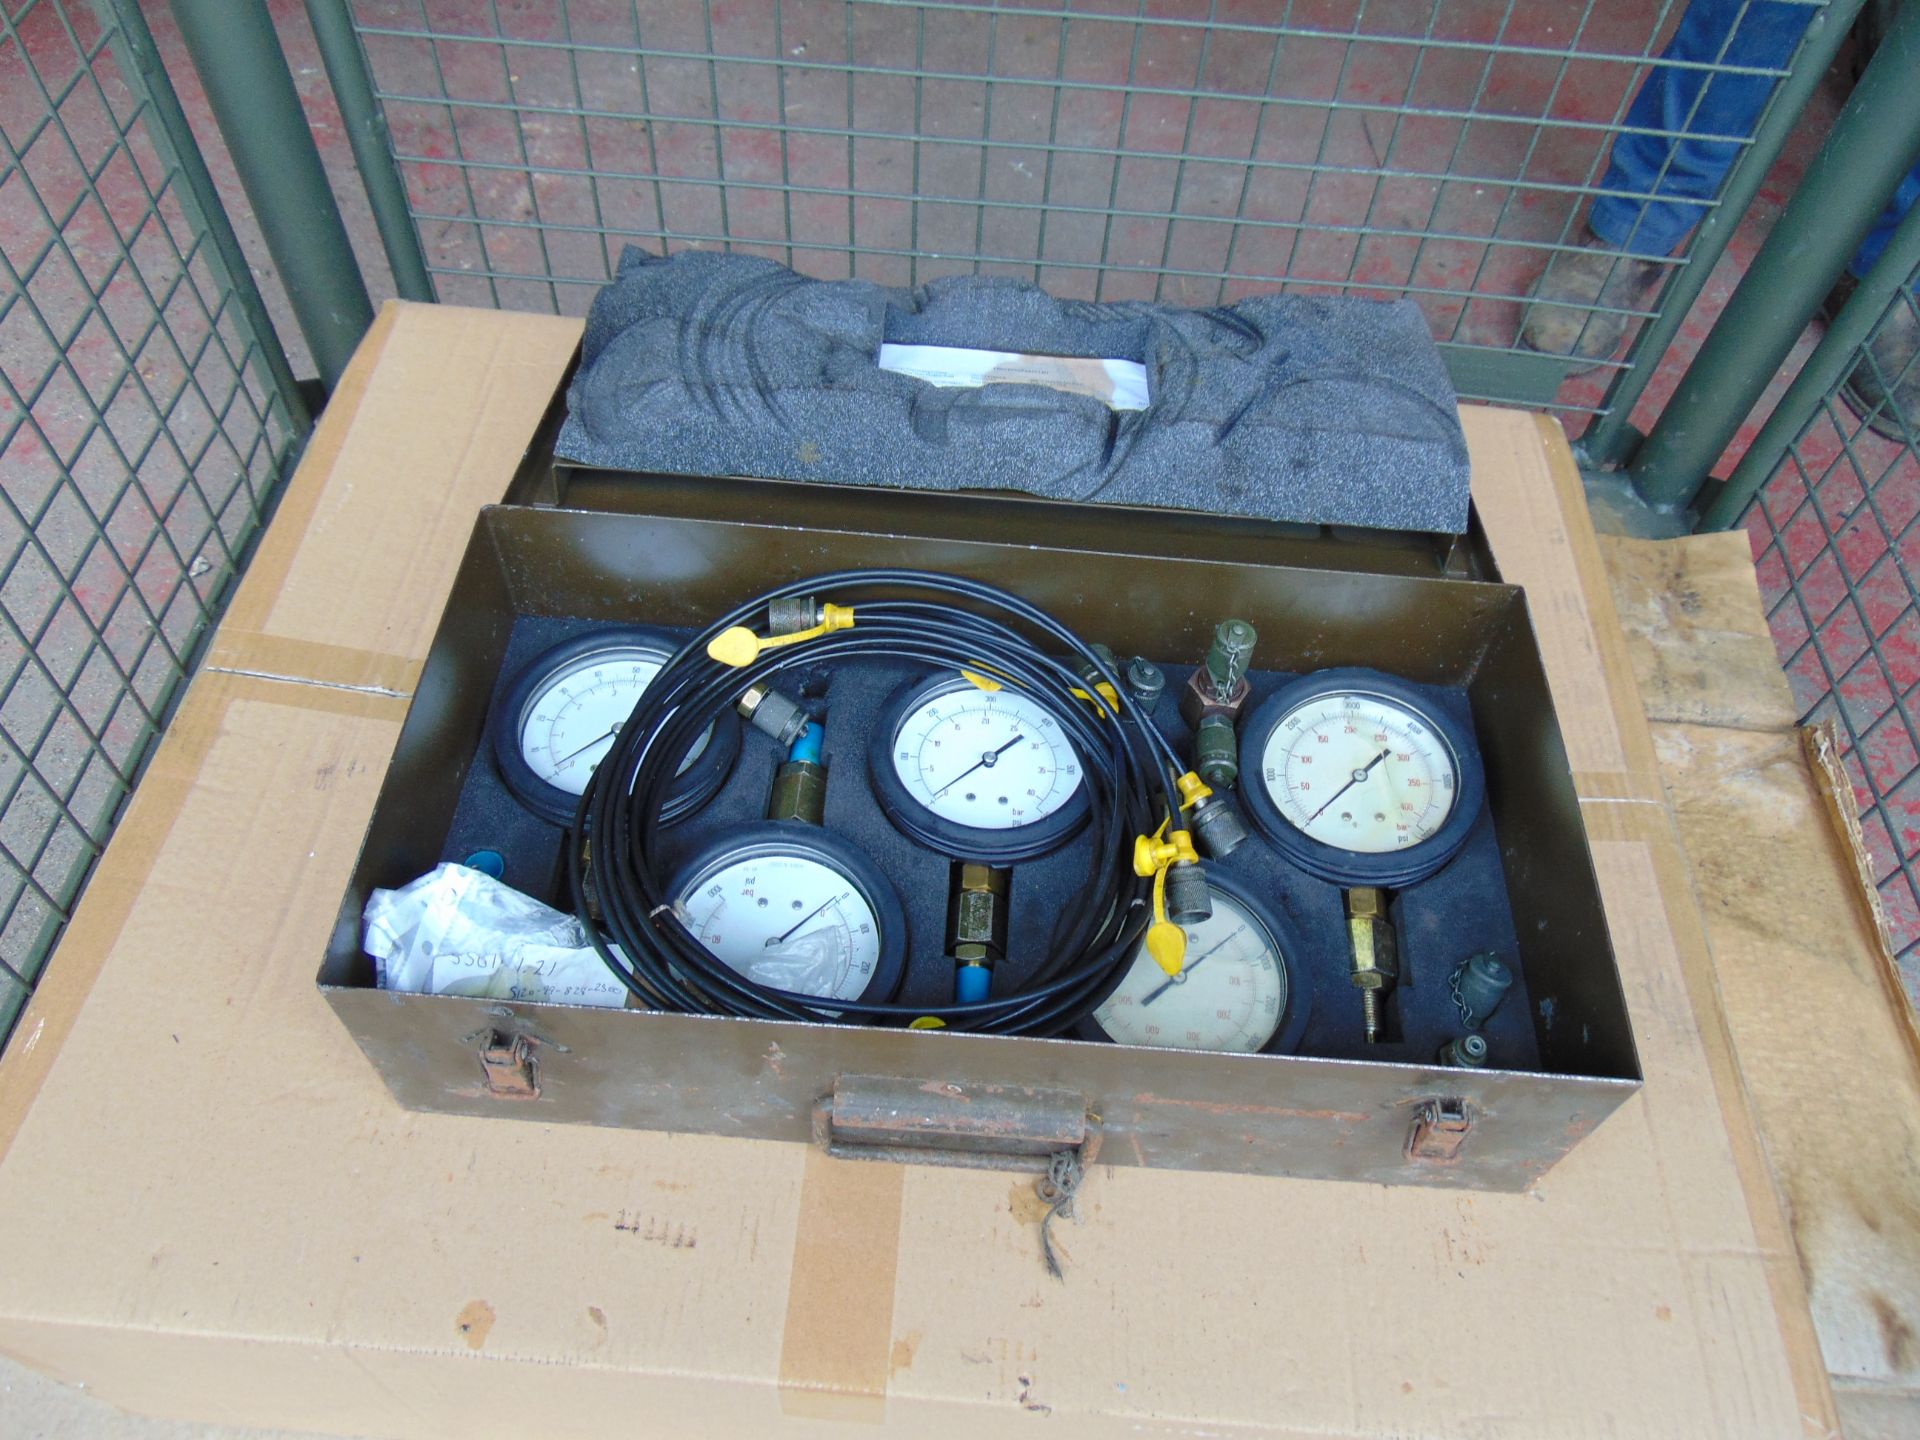 Hydraulics Pressure Testing Kit c/w Accessories from MoD - Image 2 of 5